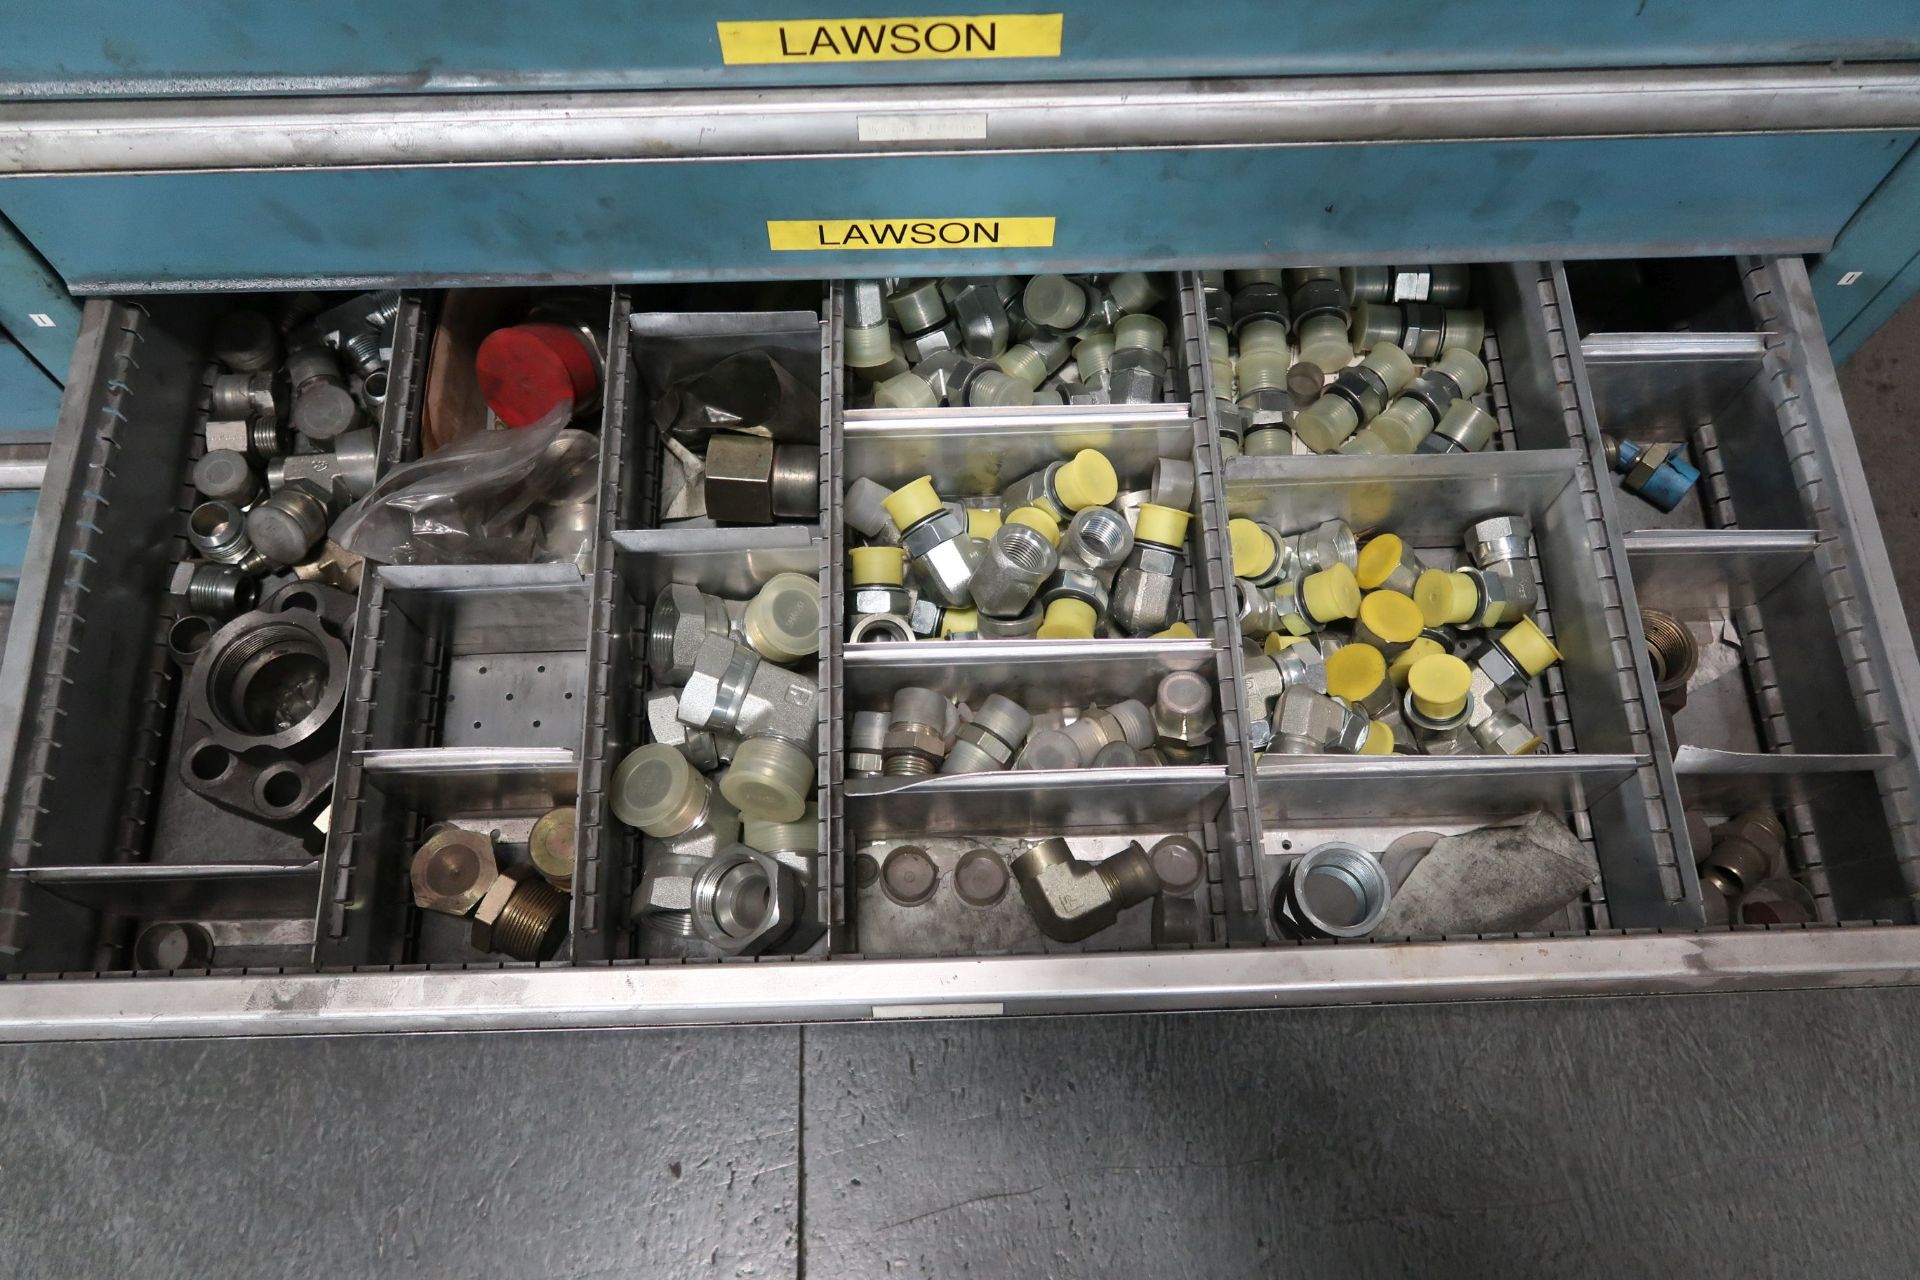 TOOLING CABINETS WITH CONTENTS - MOSTLY MACHINE PARTS **LOADING PRICE DUE TO ERRA - $2,000.00** - Image 7 of 59